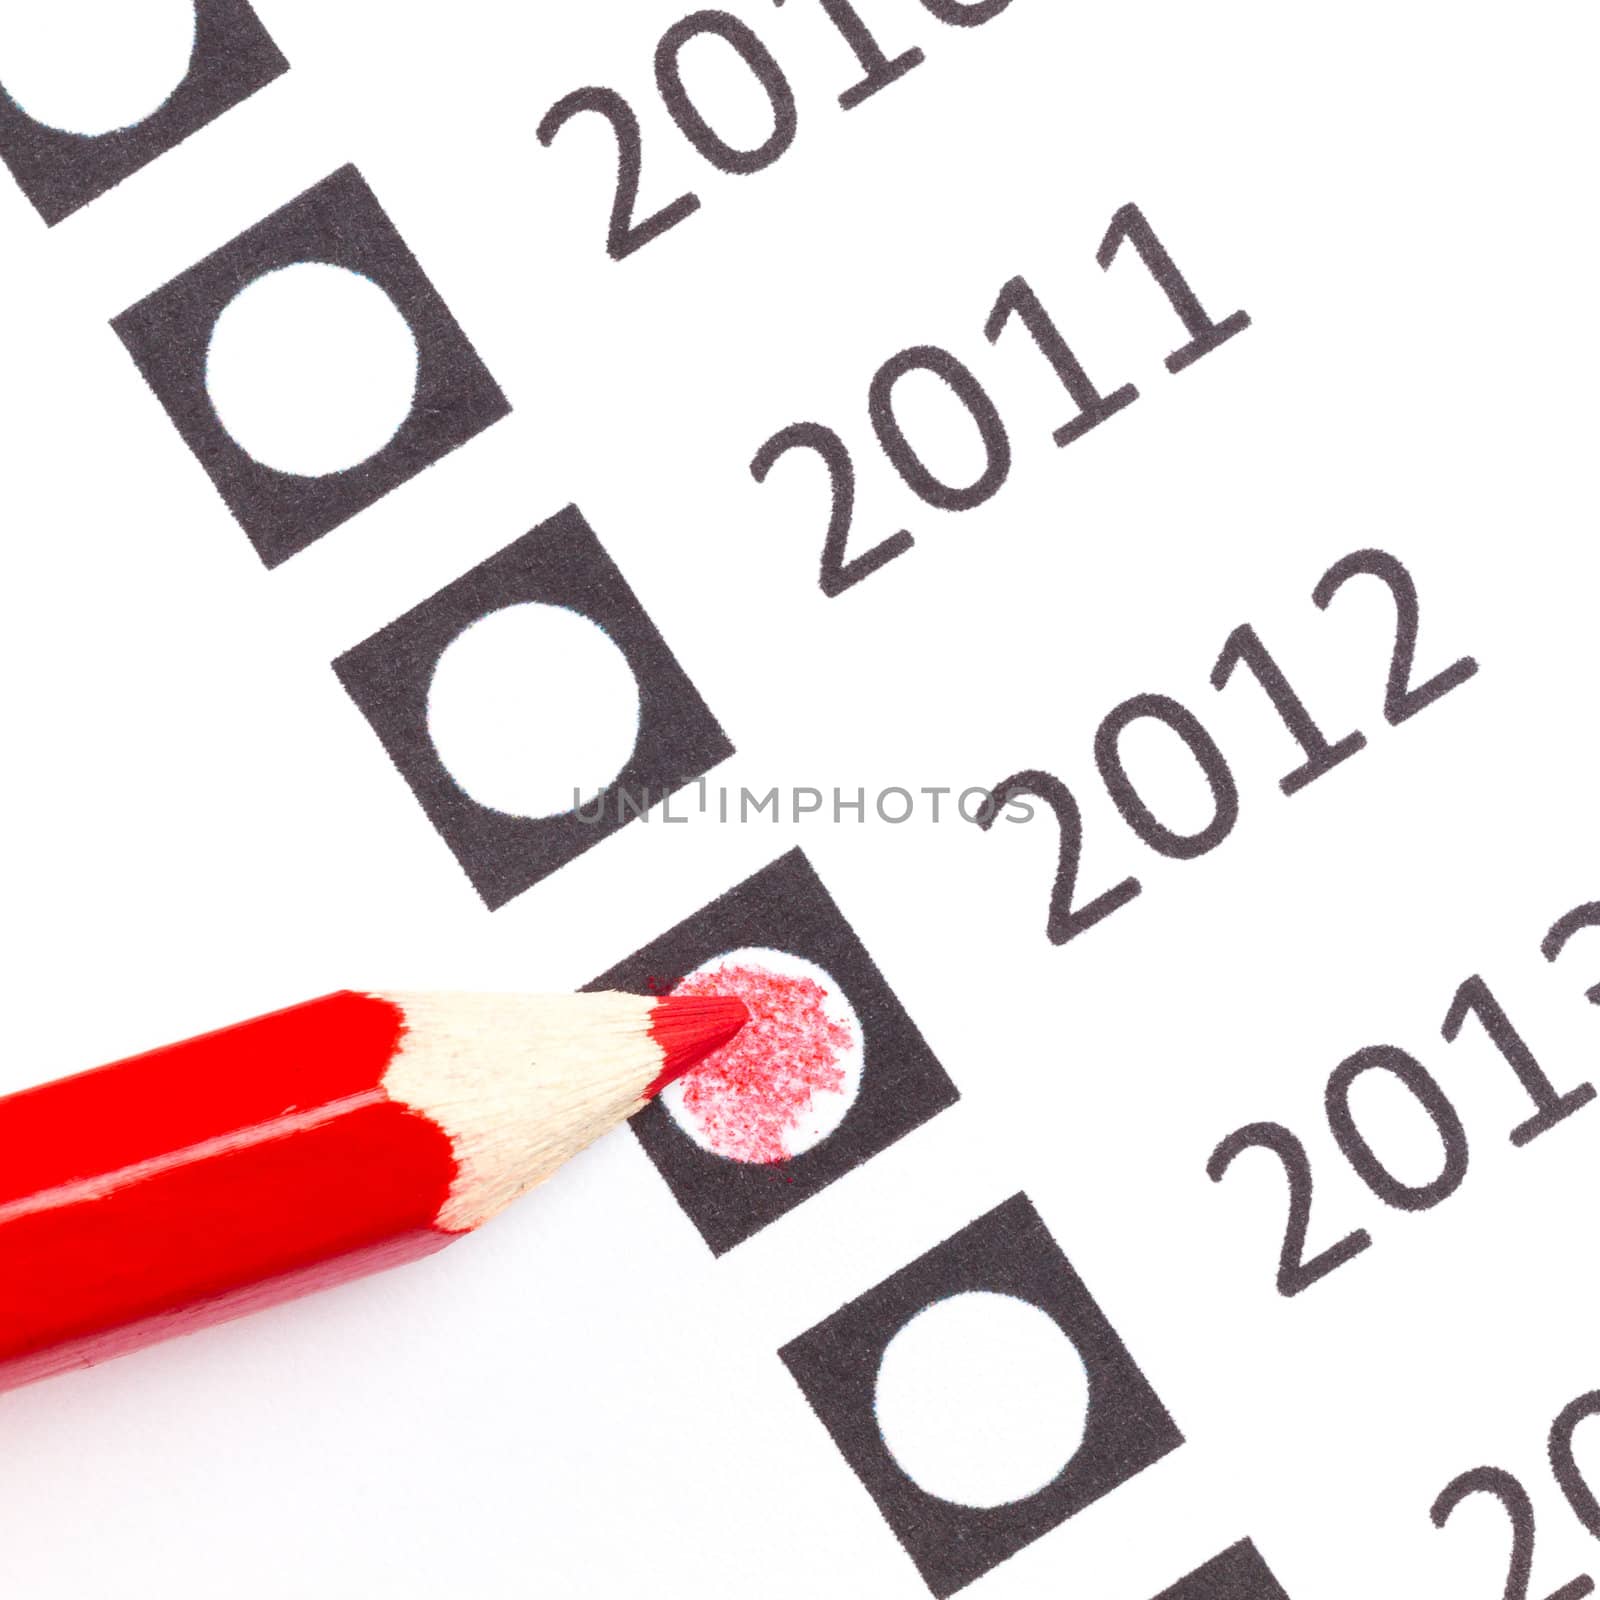 Red pencil choosing a date (year, vote)